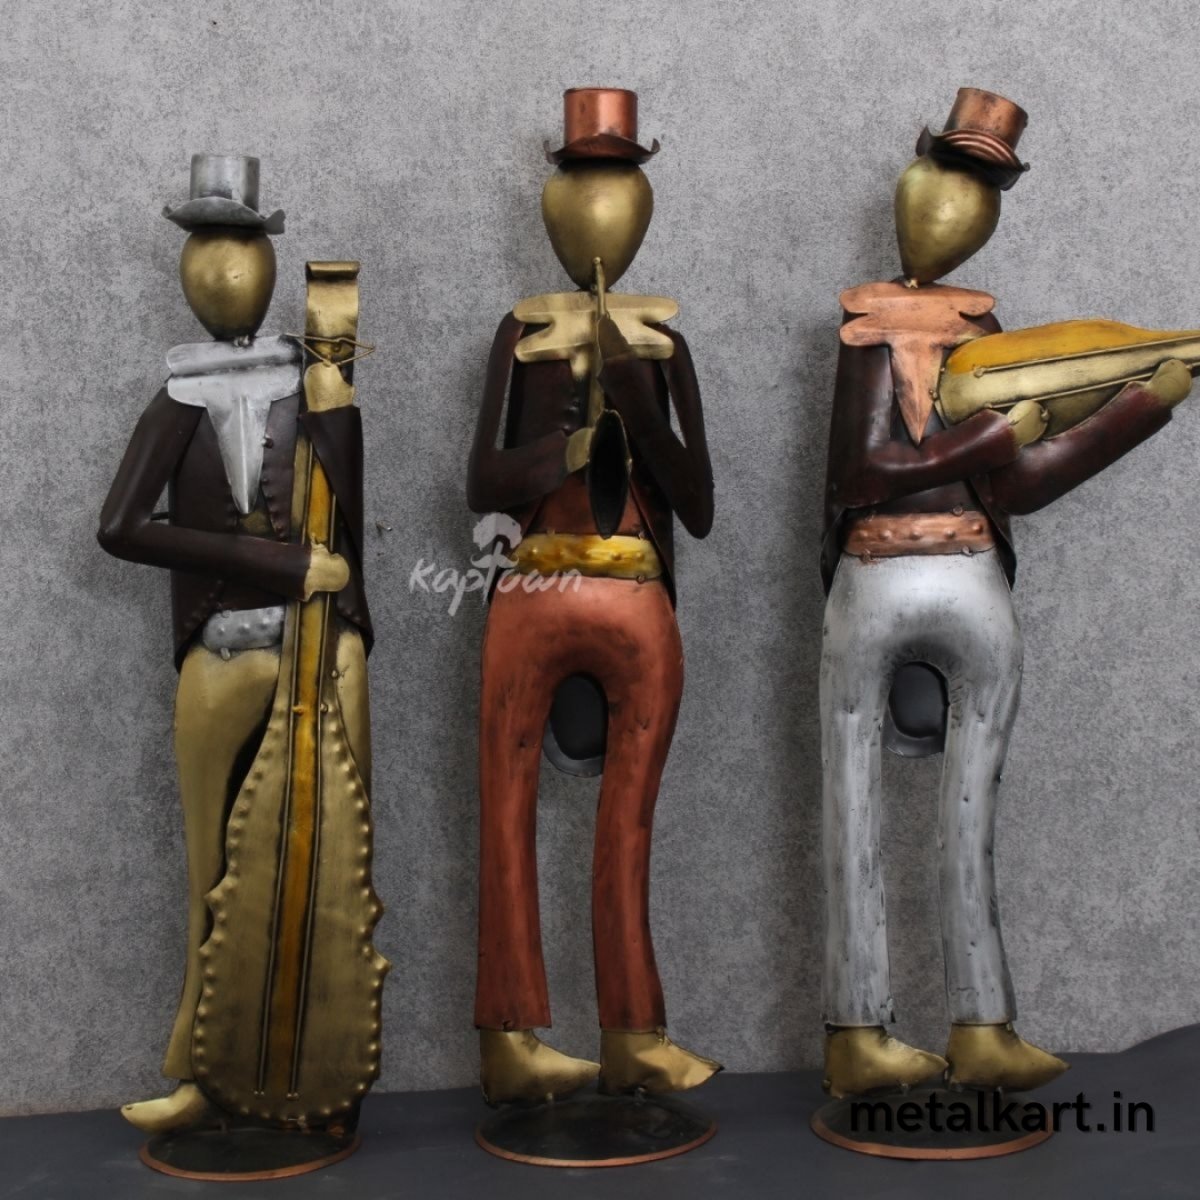 Elegant Orchestra of 3 Foreigners For living room (24*20*4 Inches)